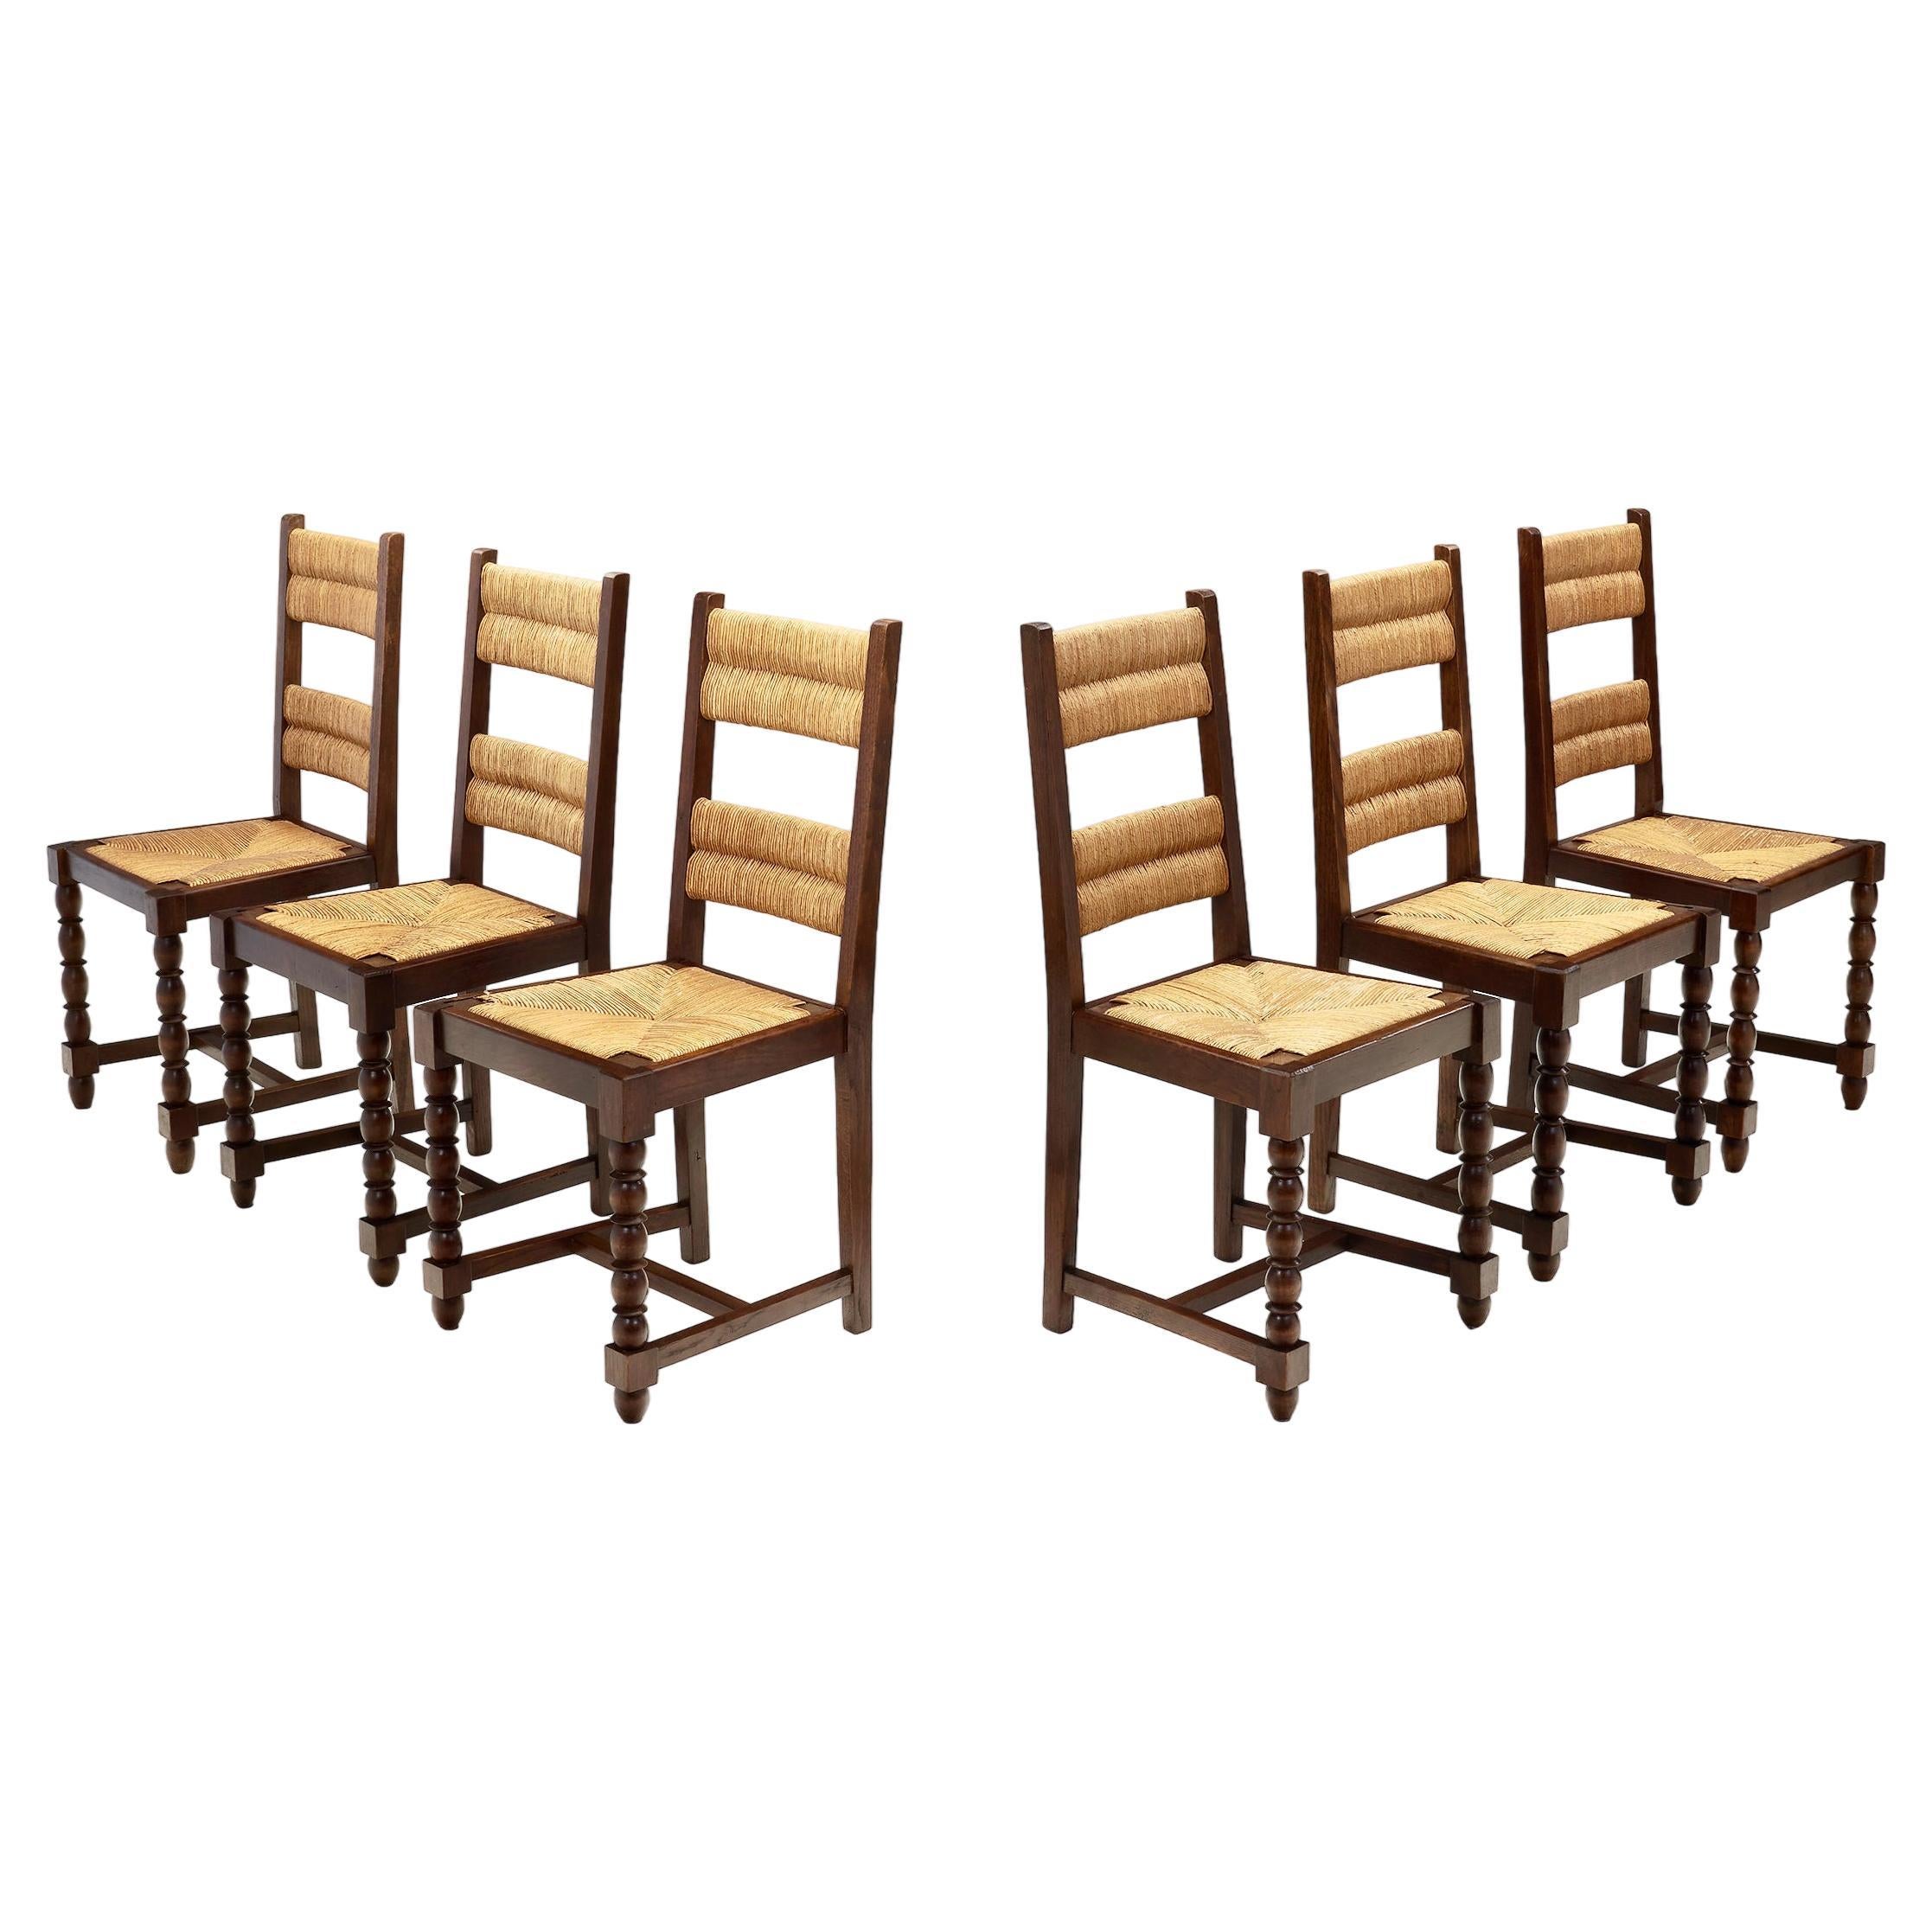 A Set of Six Cane and Wood Chairs with Sculptural Legs, Europe ca 1940s